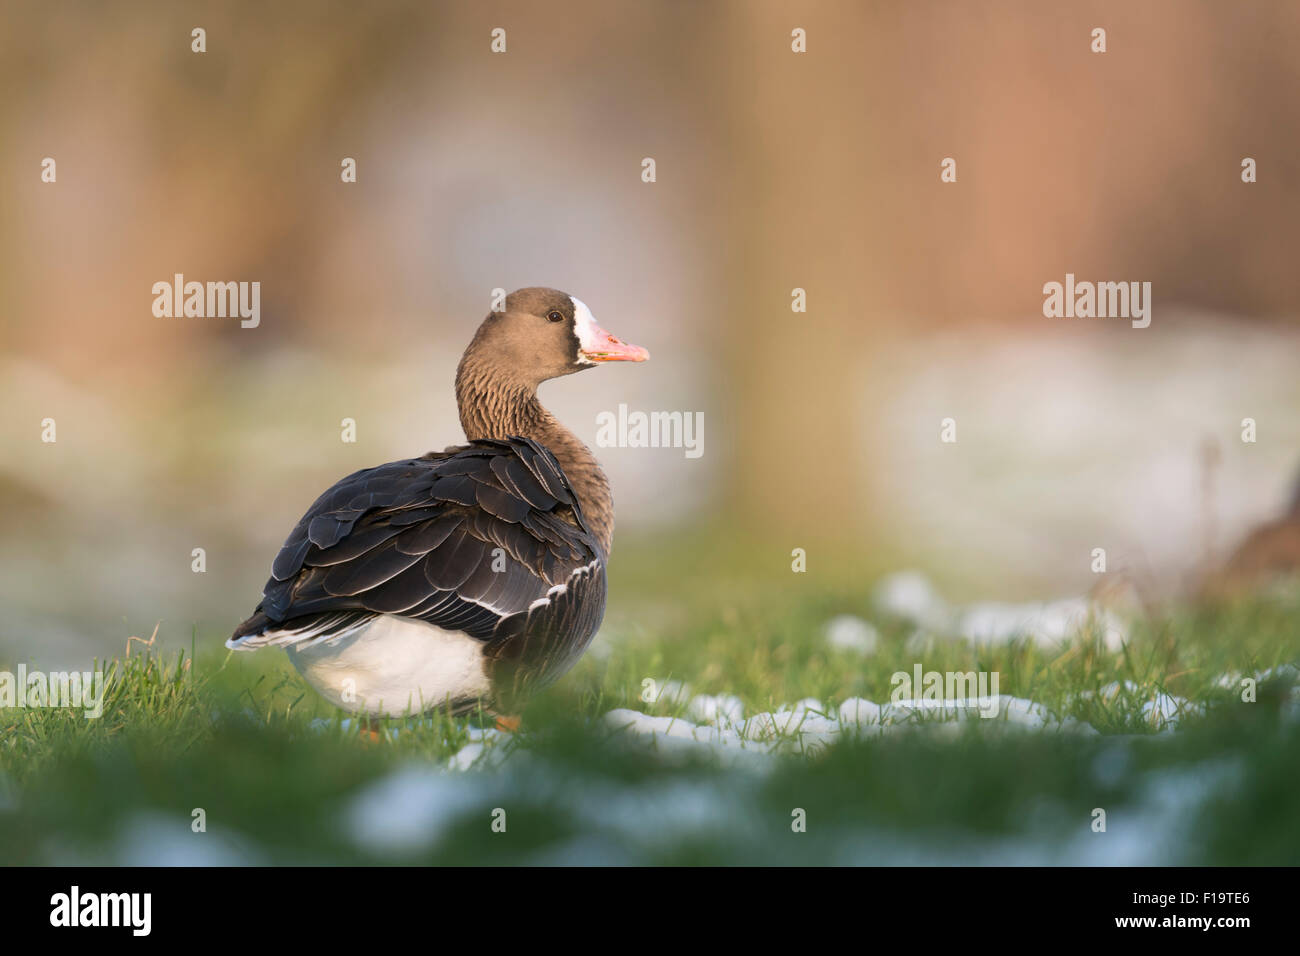 Anser albifrons / White-fronted Goose / Arctic Goose / Blessgans spends the winter on a meadow at Lower Rhine / Germany. Stock Photo